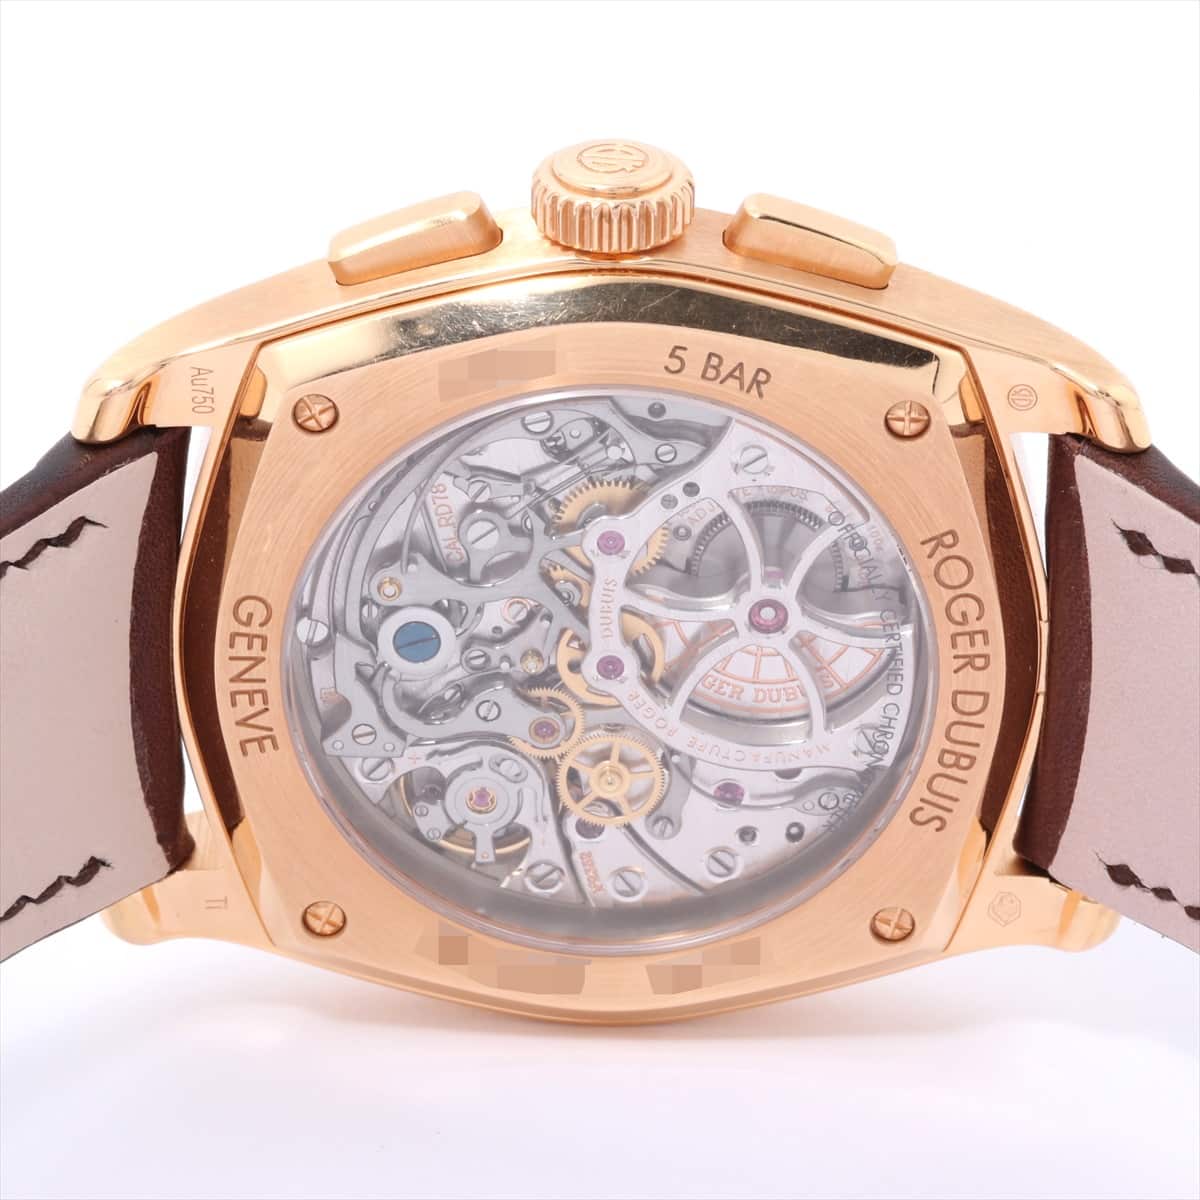 Roger Dubuis Monegesque DBMG0007 750 & leather AT Black-Face Damaged box